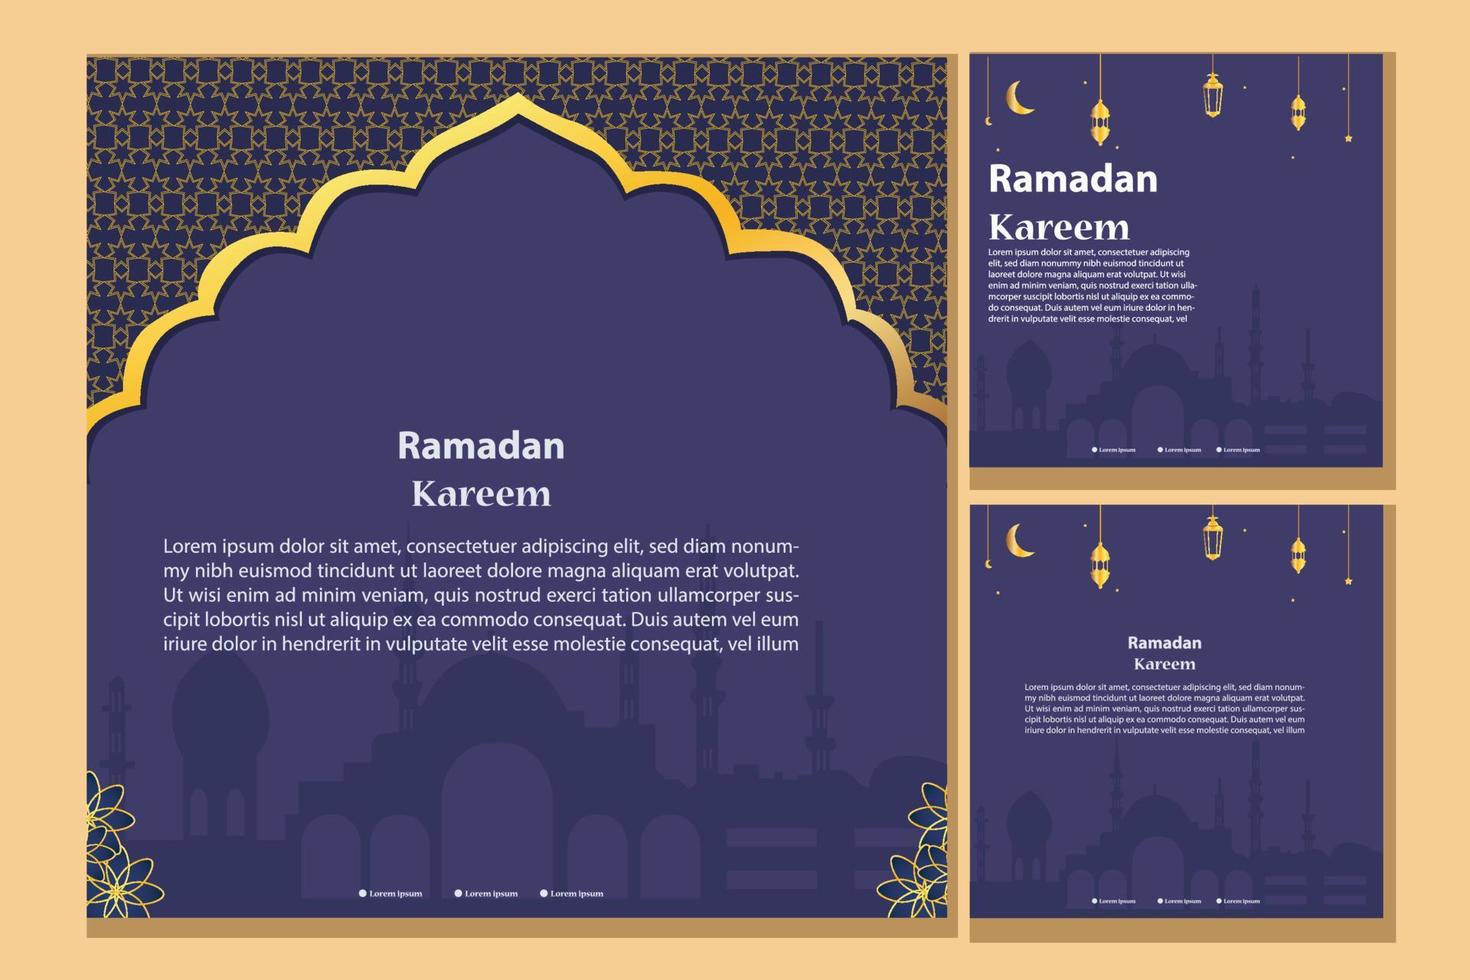 Set of Square social media post template in green, white, and blue and gold with lantern design. Iftar mean is ramadan. social media template with islamic background design vector